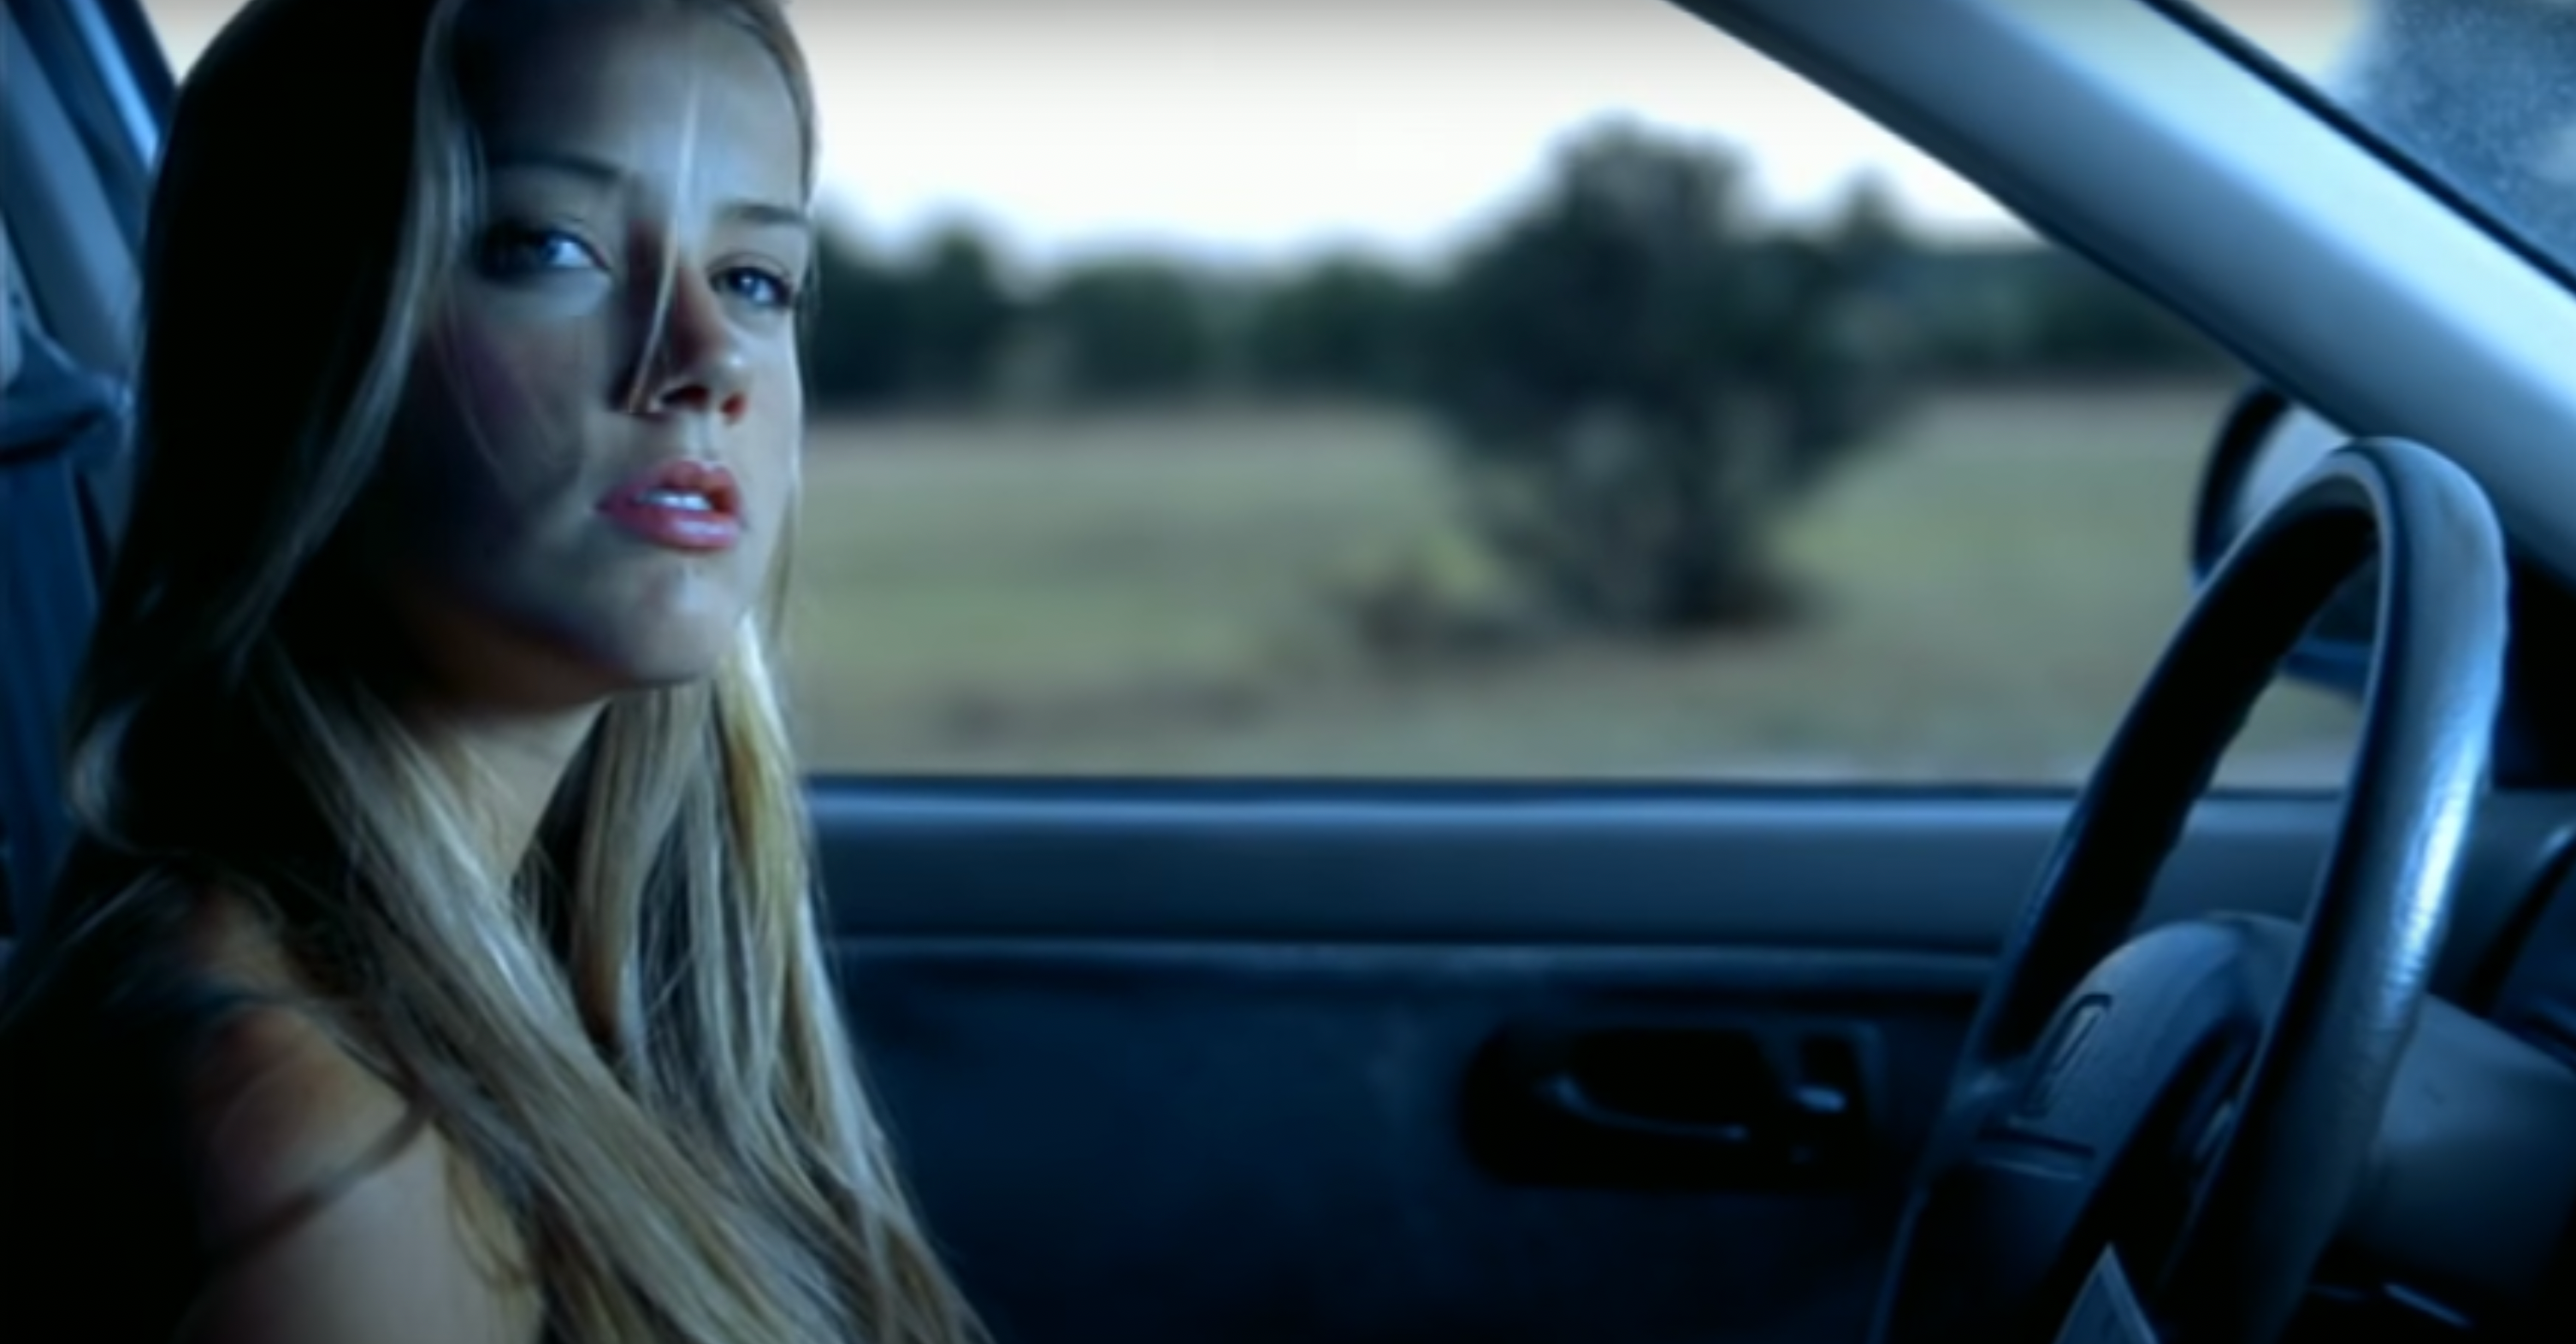 Amber Heard in Kenny Chesney’s “There Goes My Life”